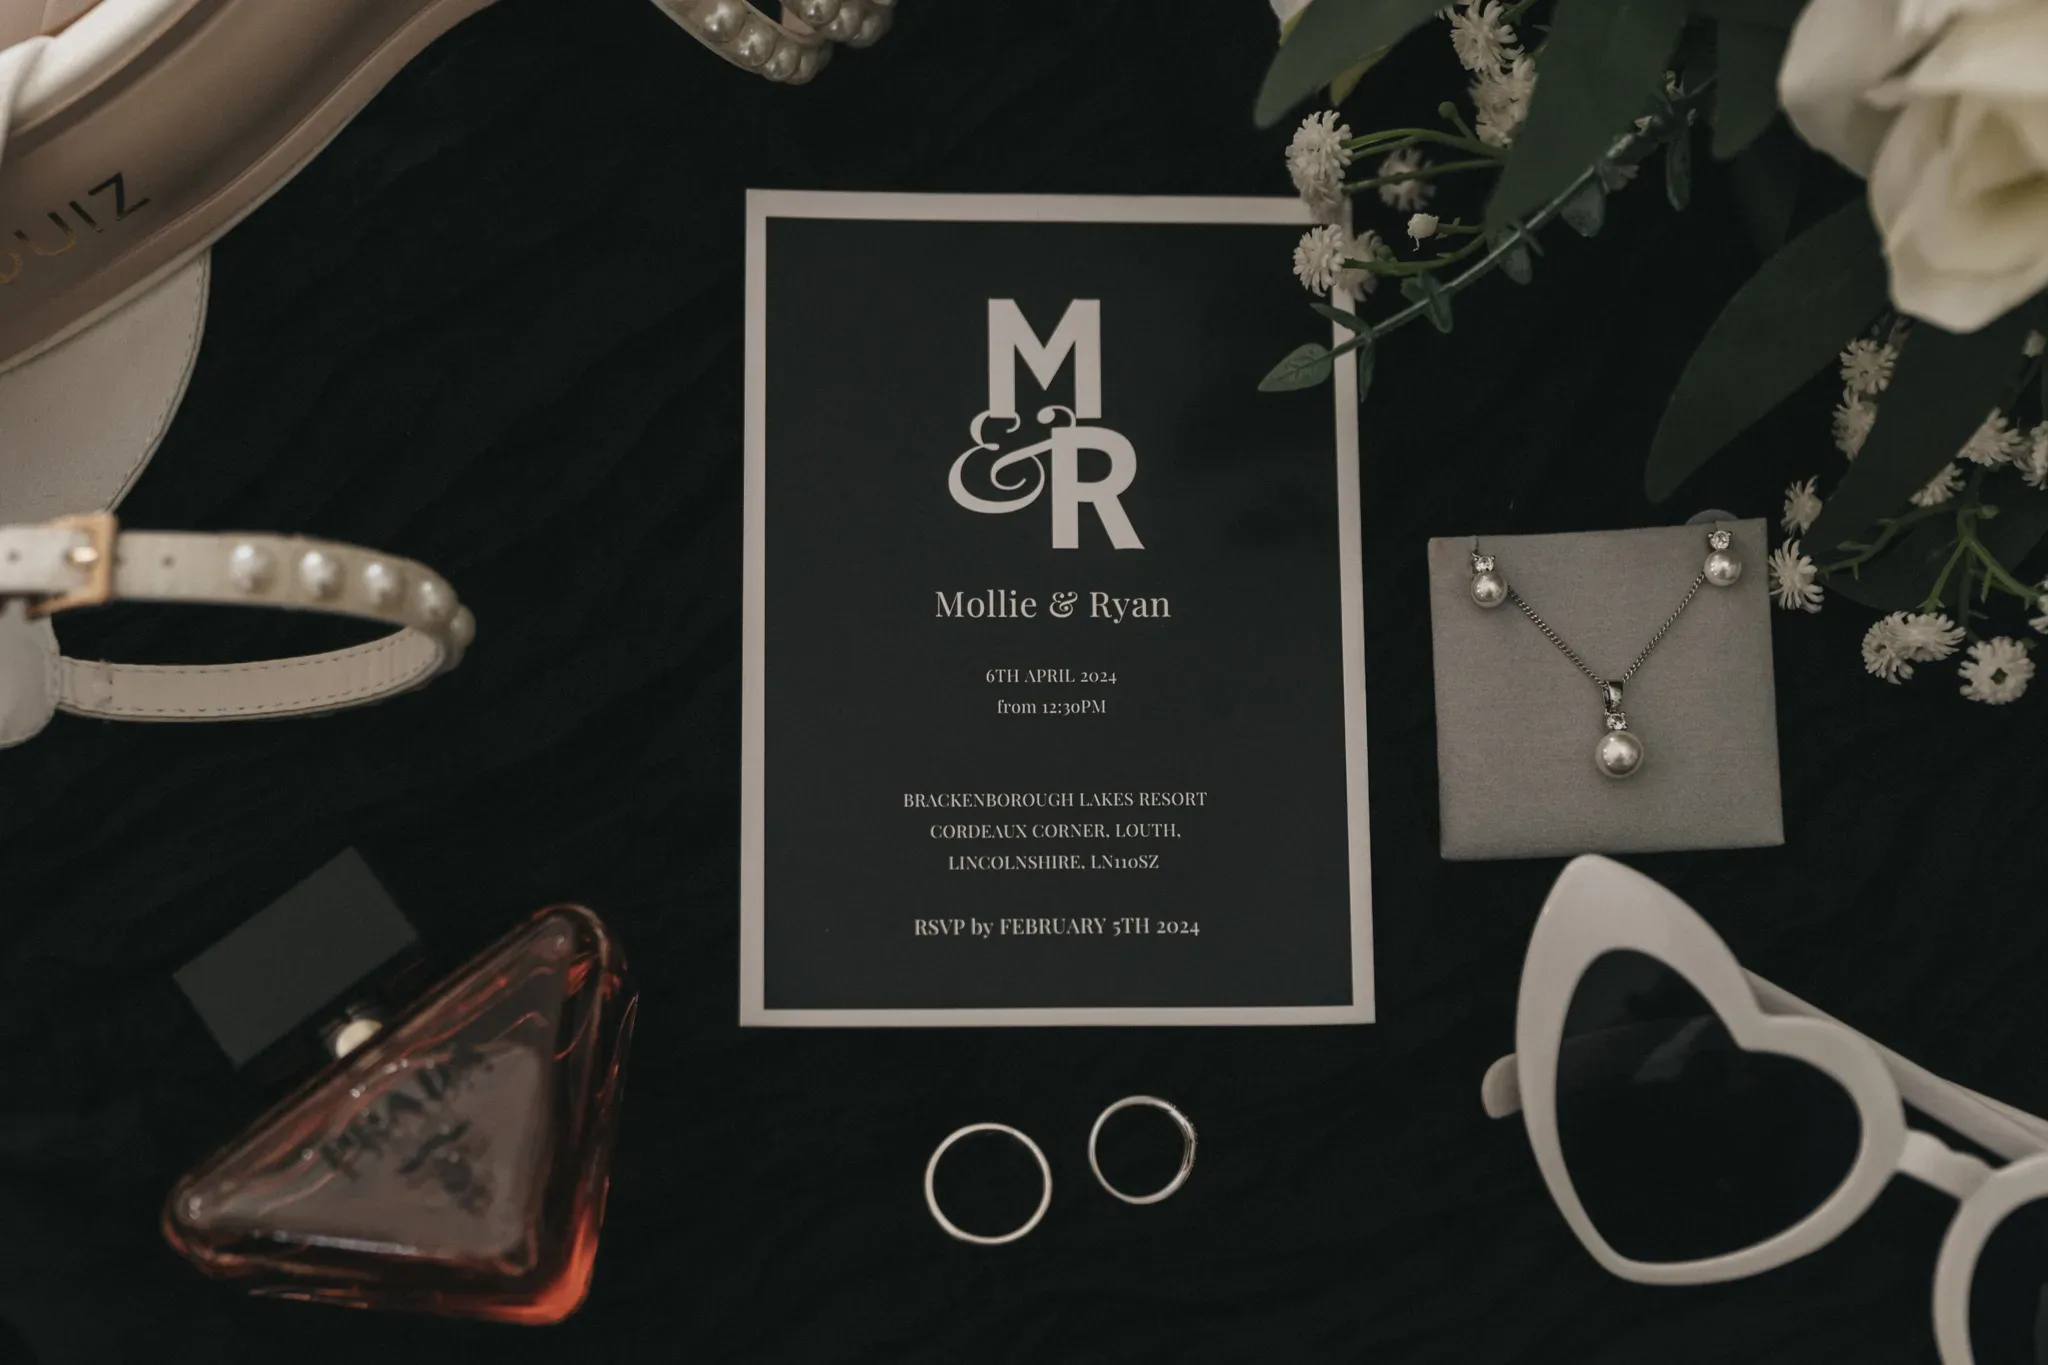 Elegant wedding invitation on a black background with "mollie & ryan" in large letters, surrounded by floral decorations, a white strap with pearls, a pair of earrings, sunglasses, and a perfume bottle.